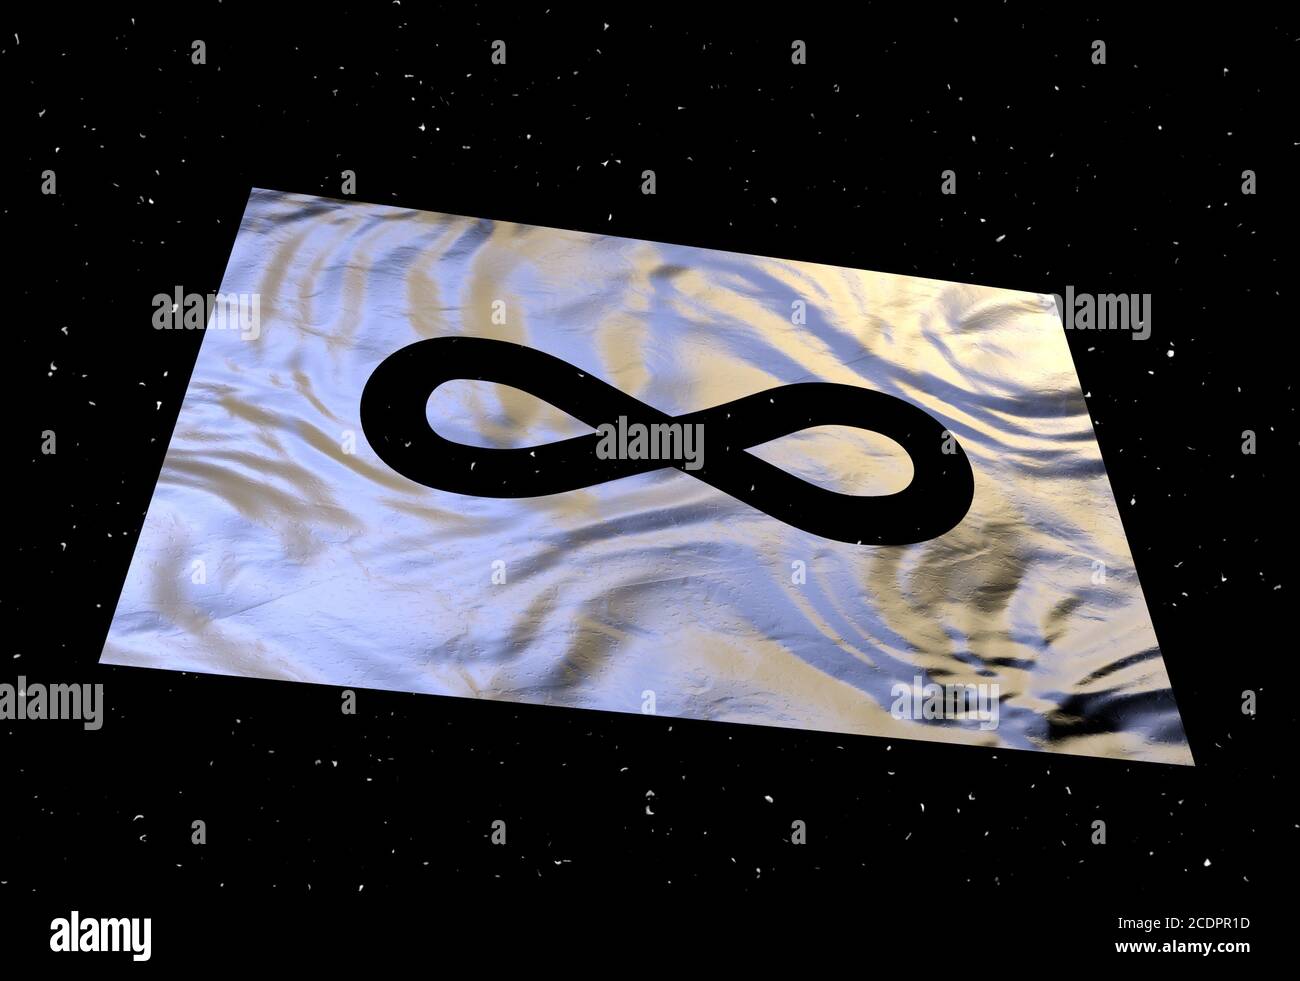 infinity sign with stars 3d illustration Stock Photo